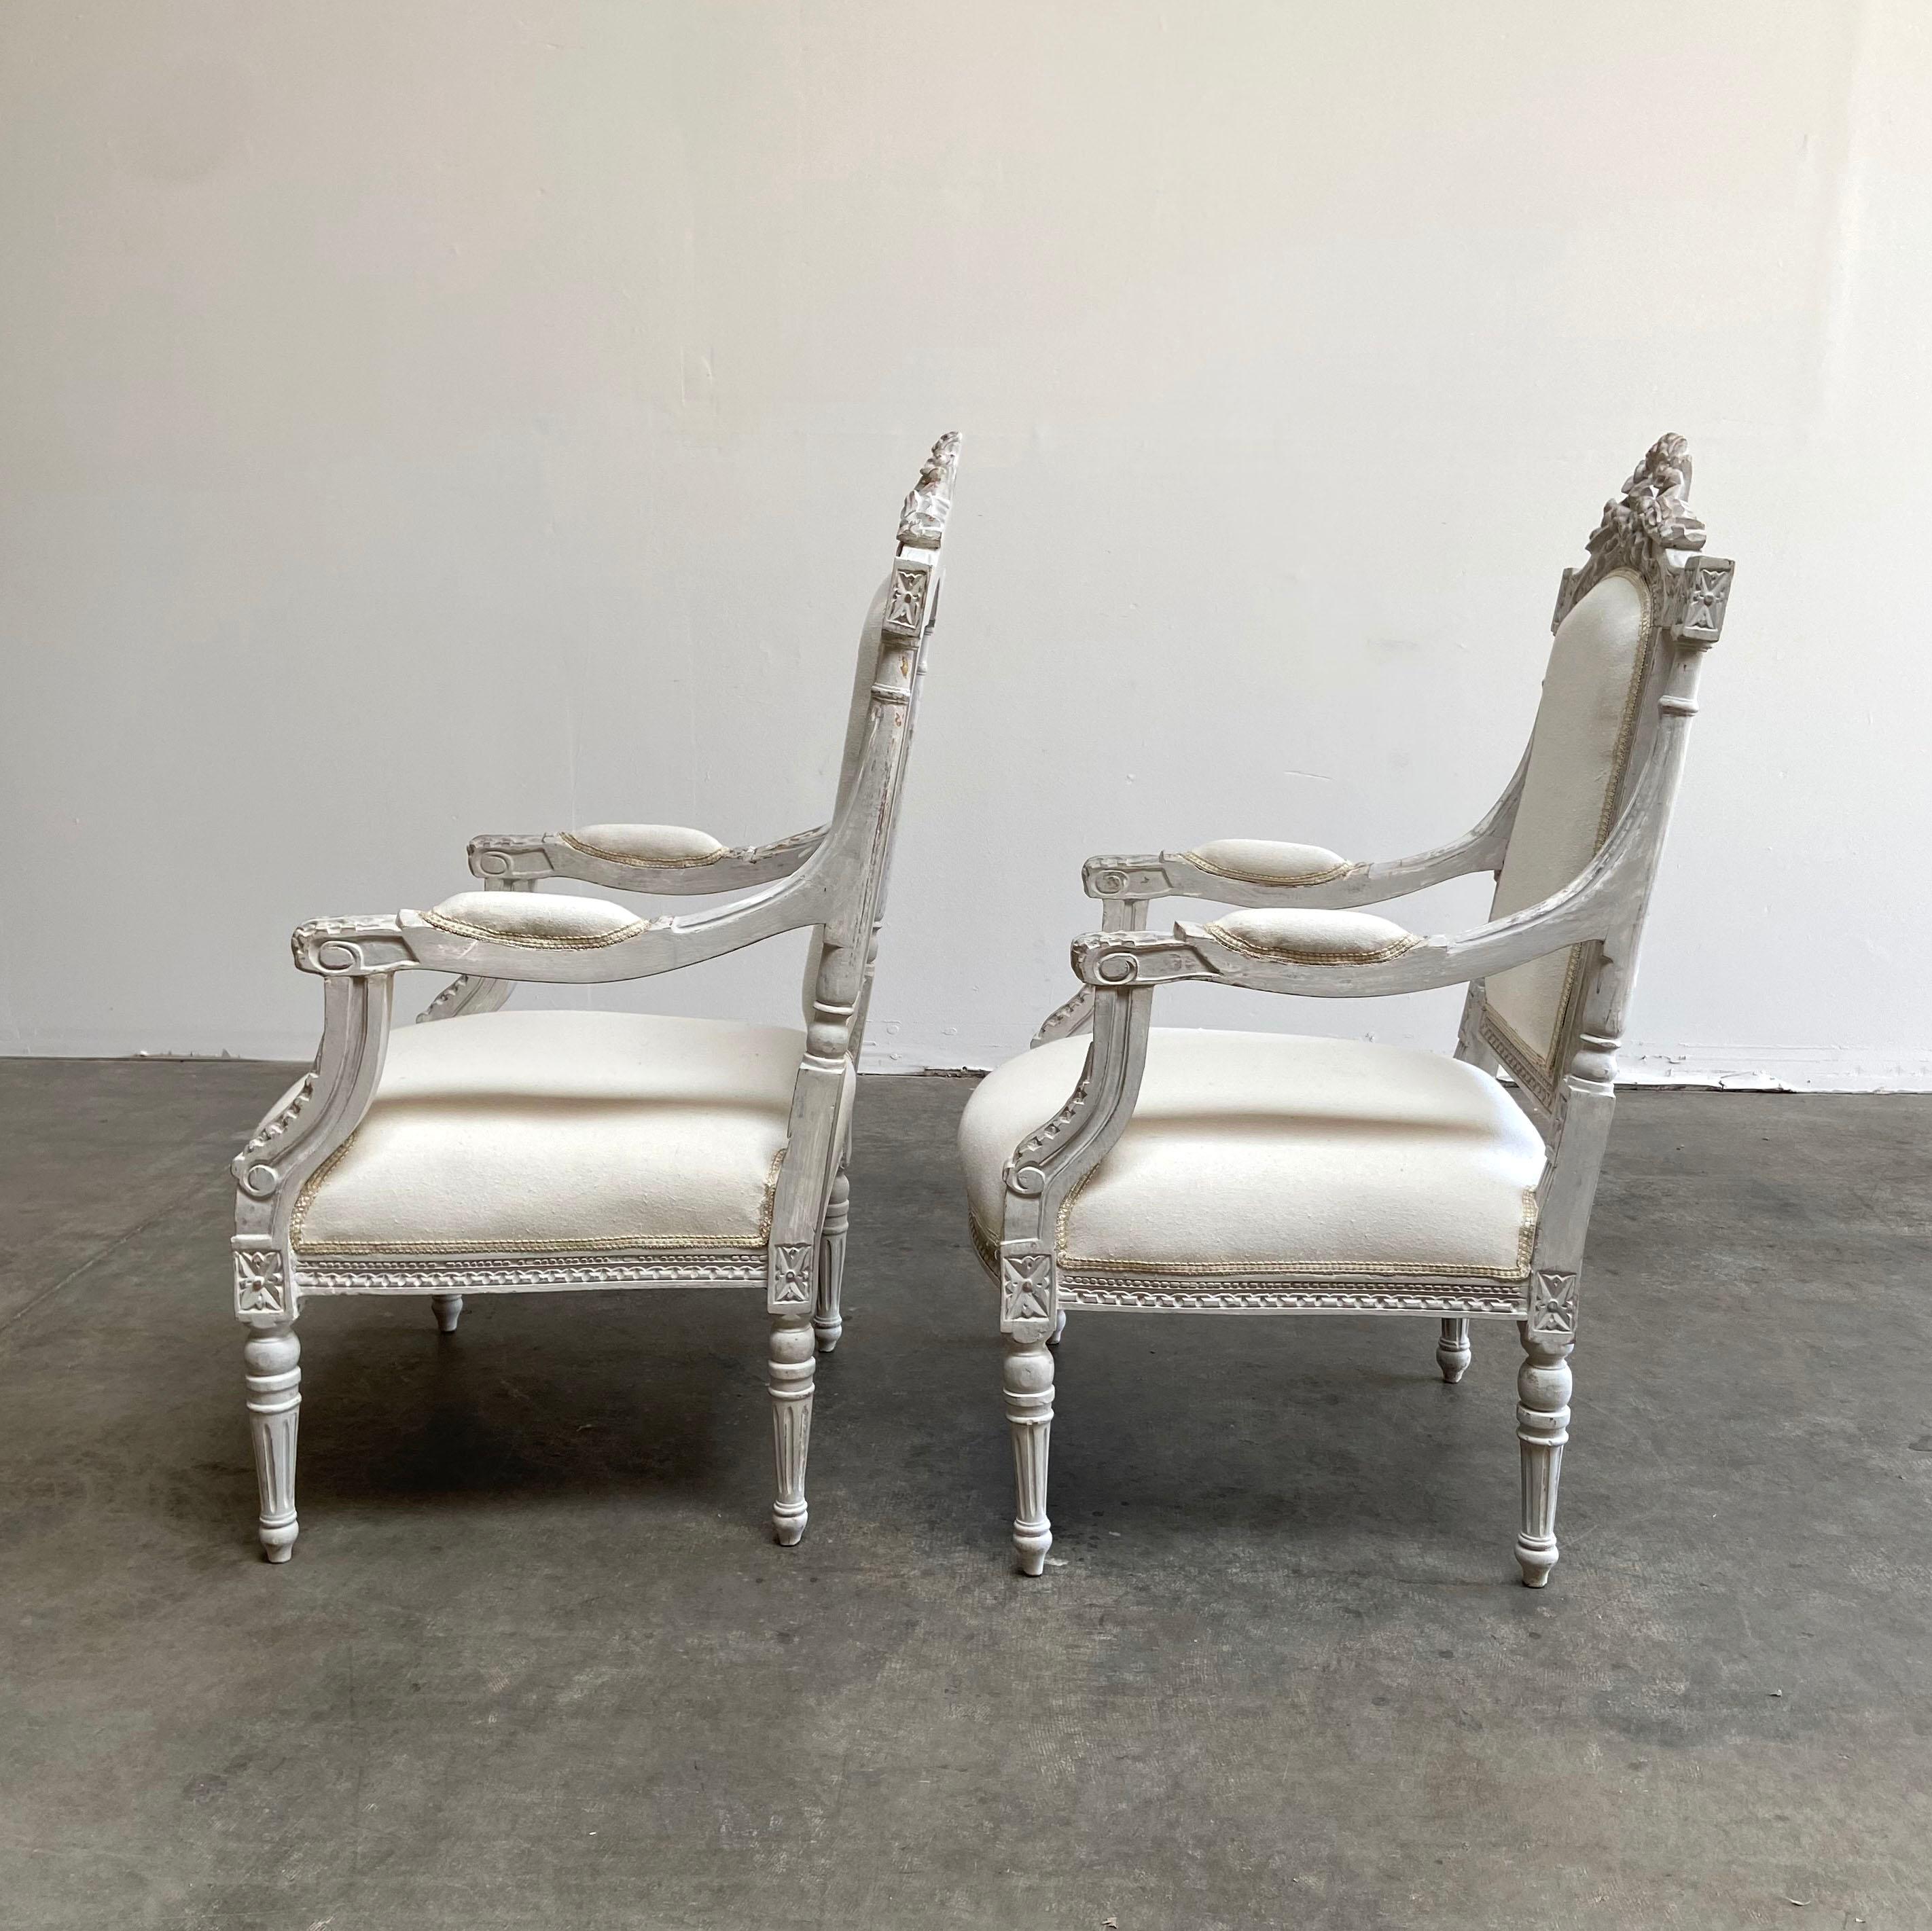 20th Century Vintage Pair of Painted and Upholstered Louis XVI Style Carved Chairs